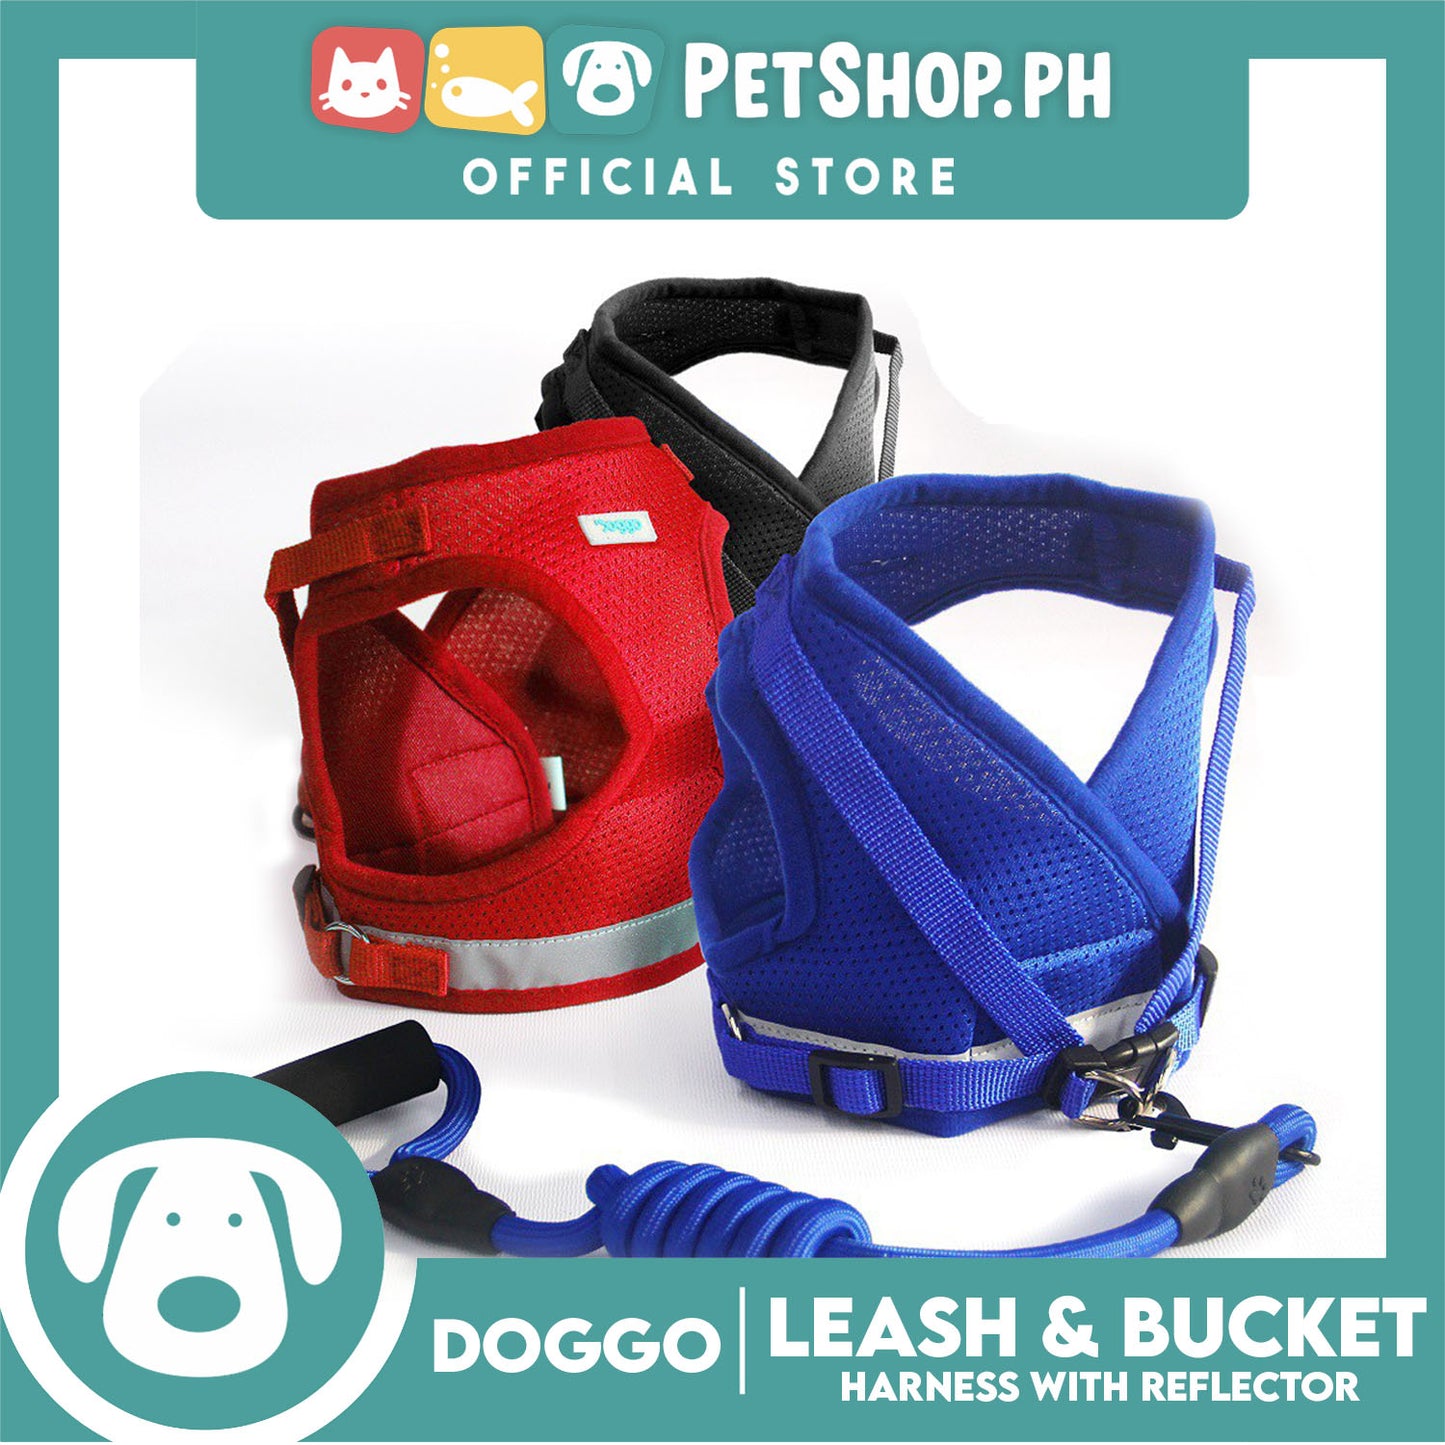 Doggo Leash and Bucket Harness with Reflector Extra Large (Blue) Perfect Set for Your Dog